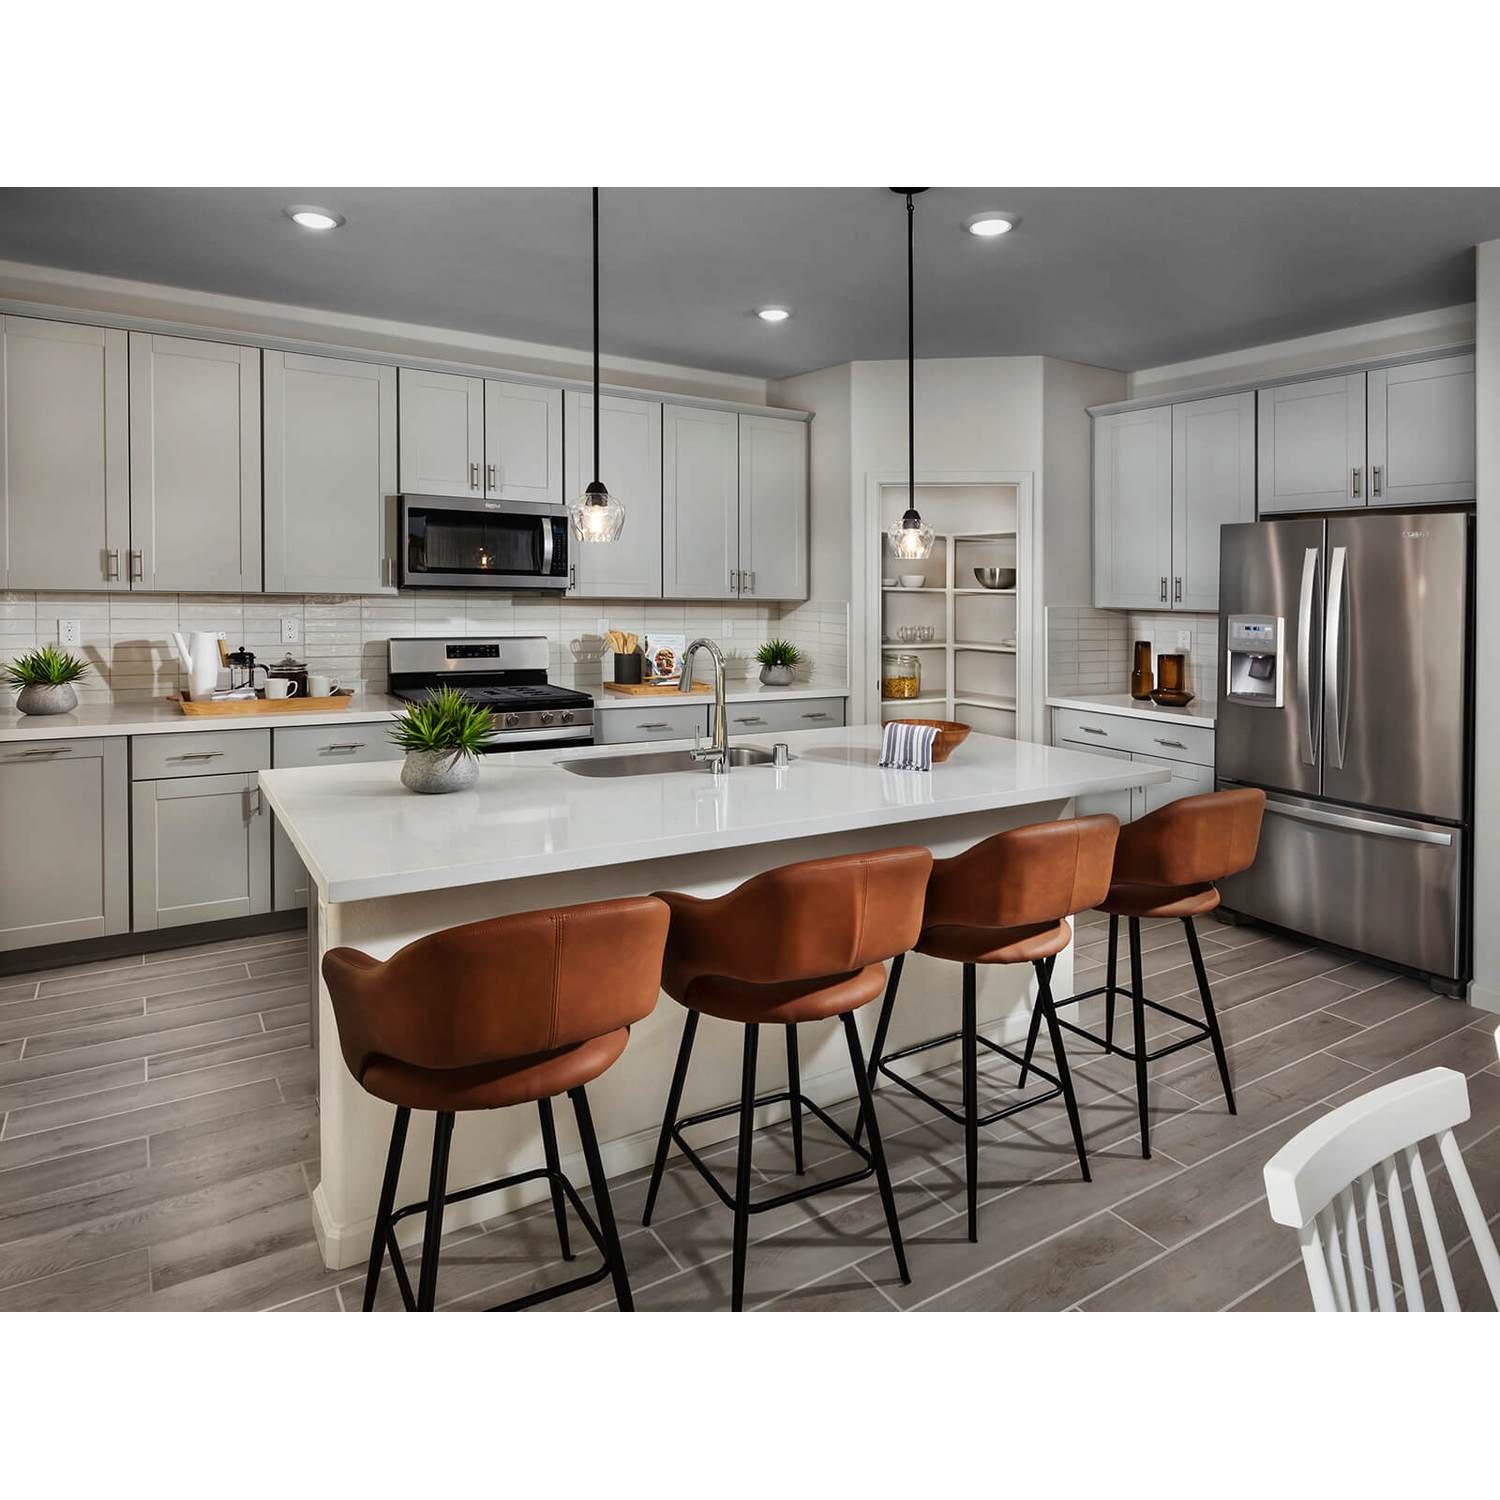 1. Now Pre-Selling From Roam At Winding Creek: 5056 Grasscreek Dr.